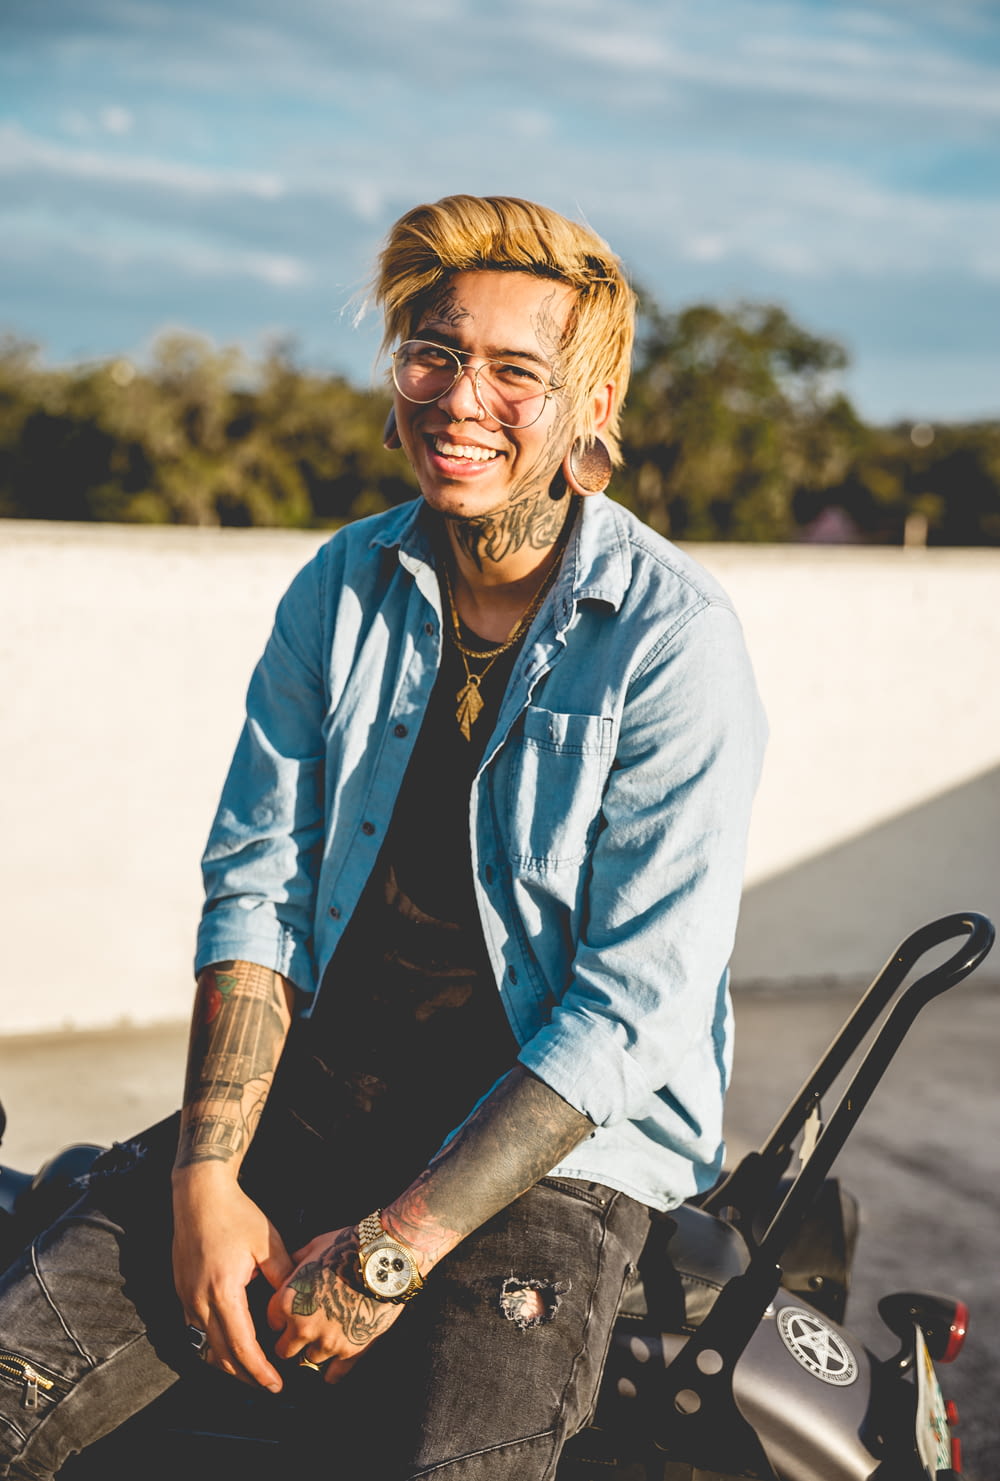 a man with tattoos sitting on a motorcycle